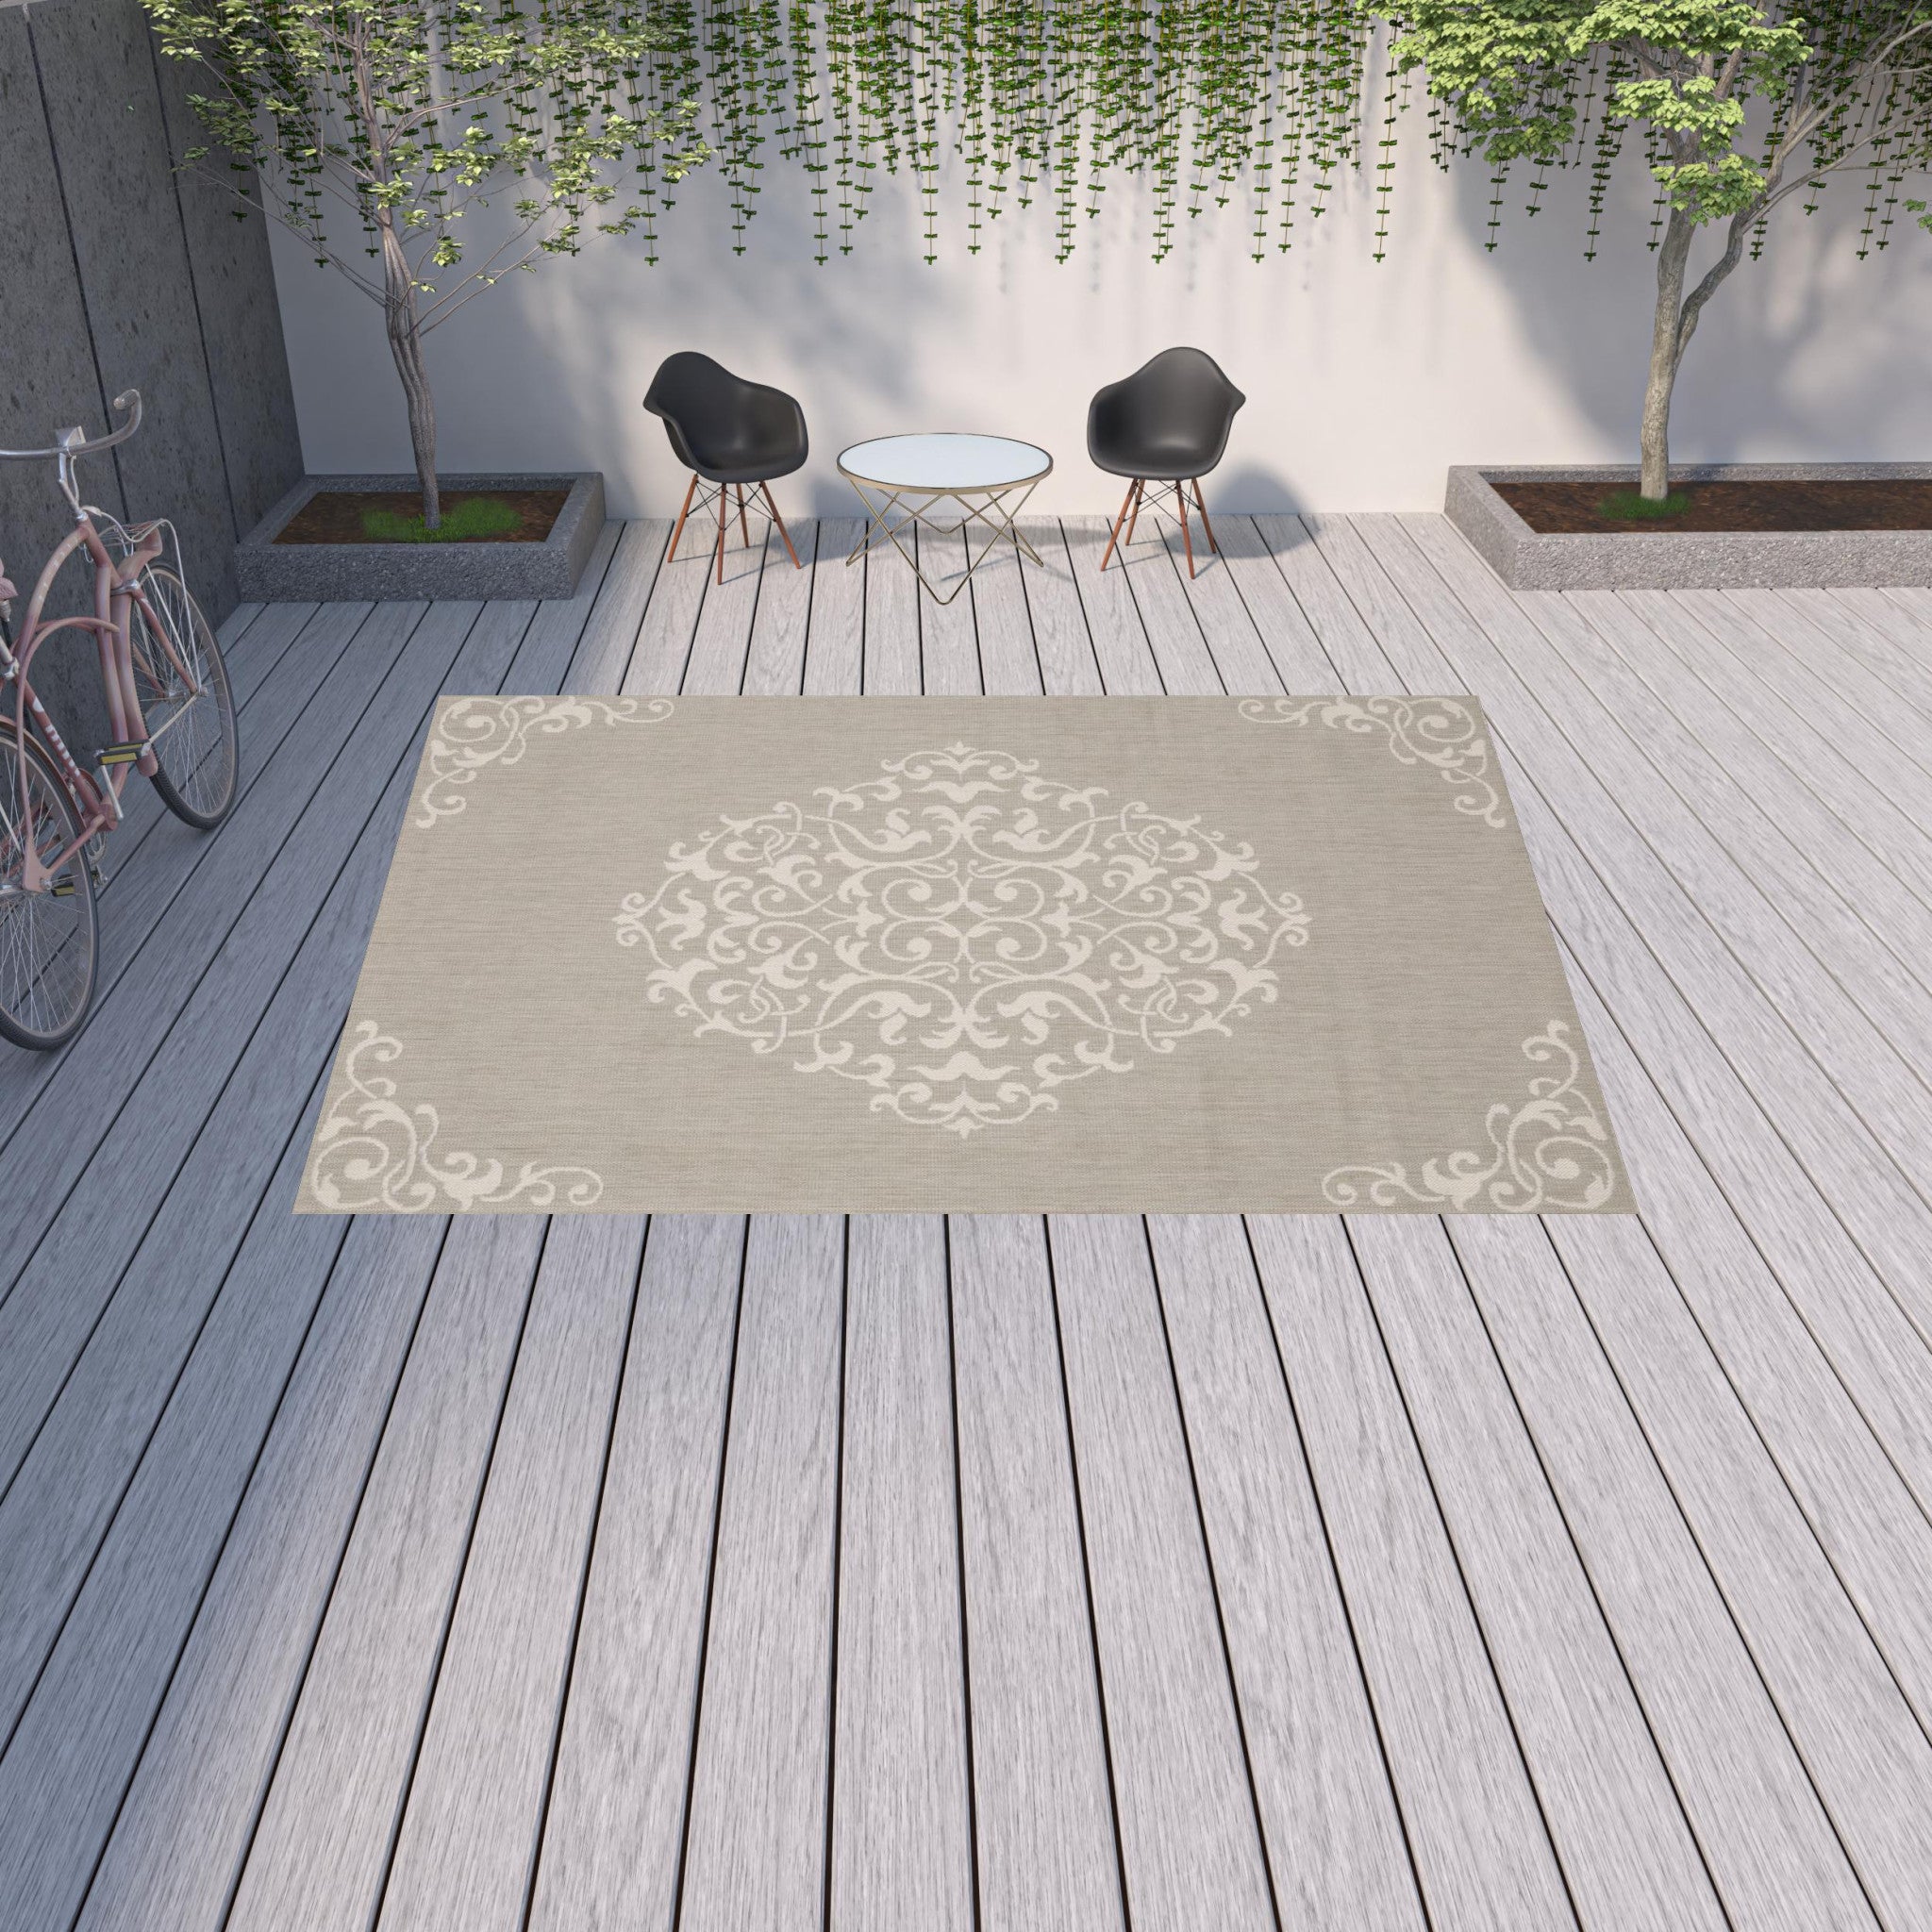 10' x 13' Gray and Ivory Oriental Stain Resistant Indoor Outdoor Area Rug